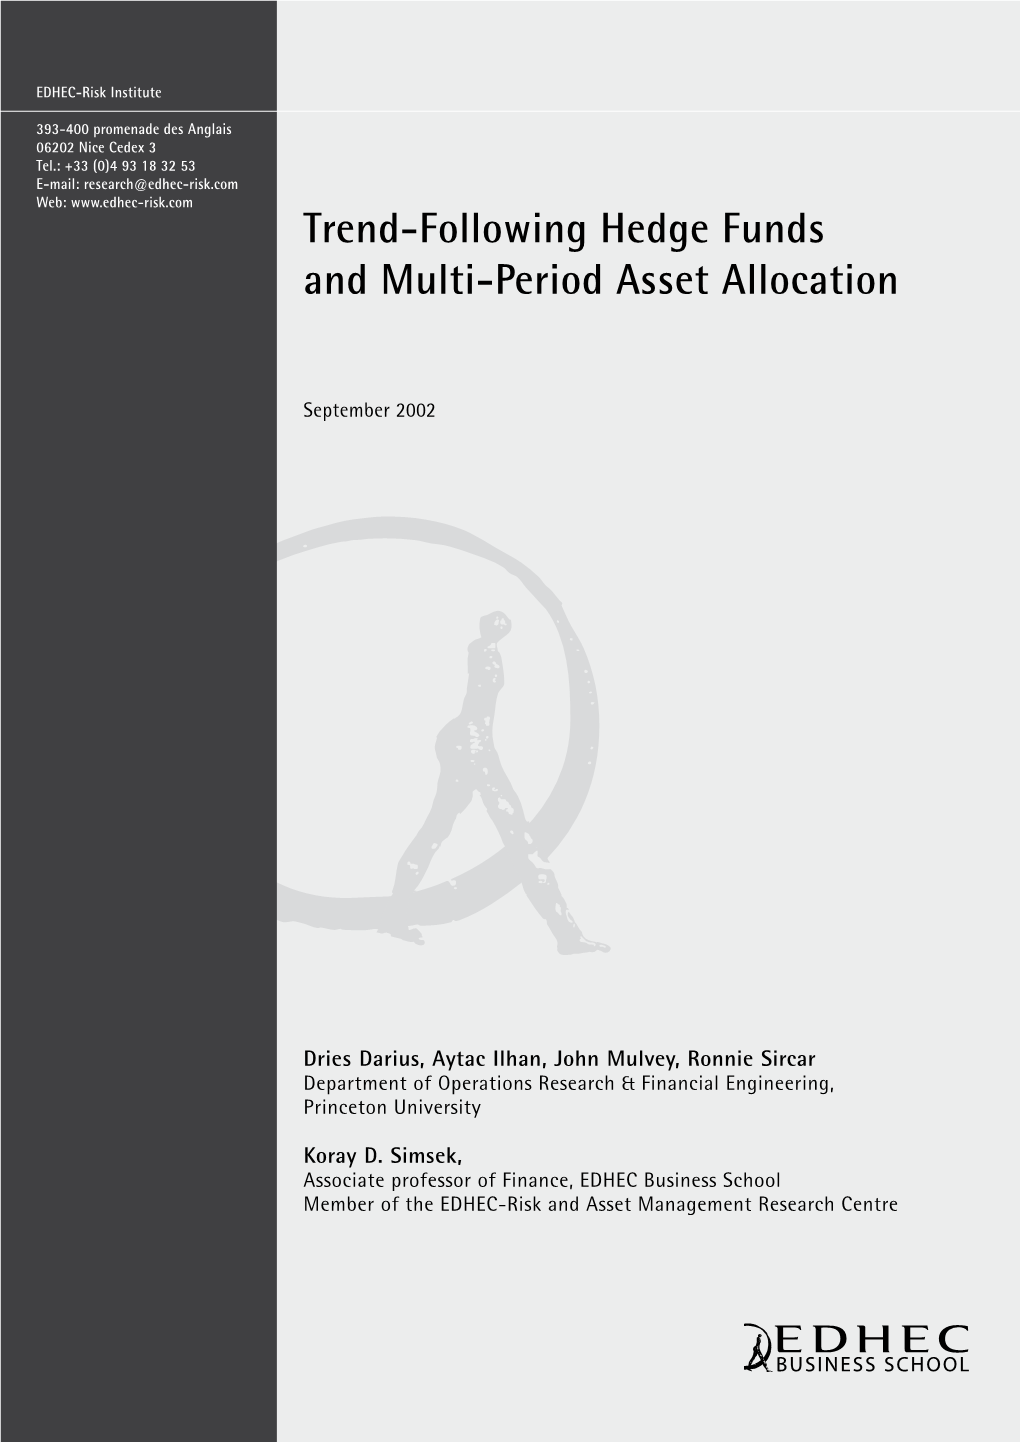 Trend-Following Hedge Funds and Multi-Period Asset Allocation